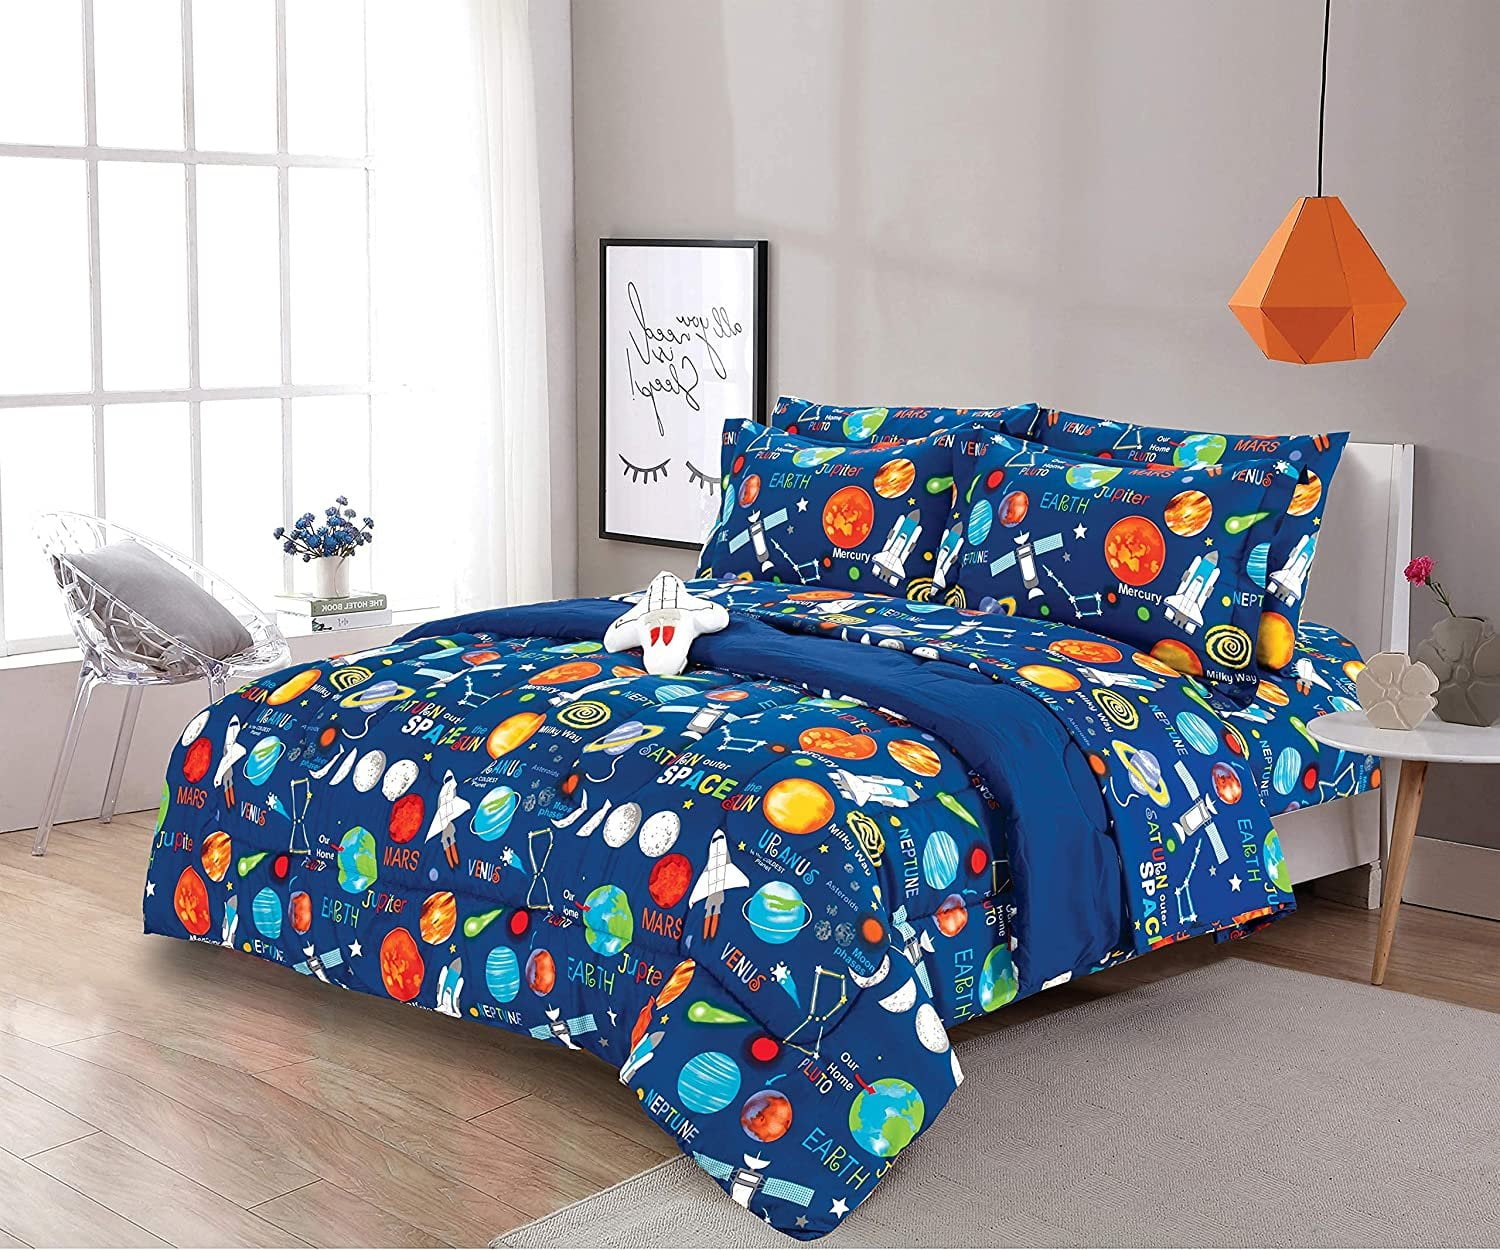 A Nice Night Closure-Printed Marble Ultra Soft Comforter Set Bed-in-a-Bag,Queen